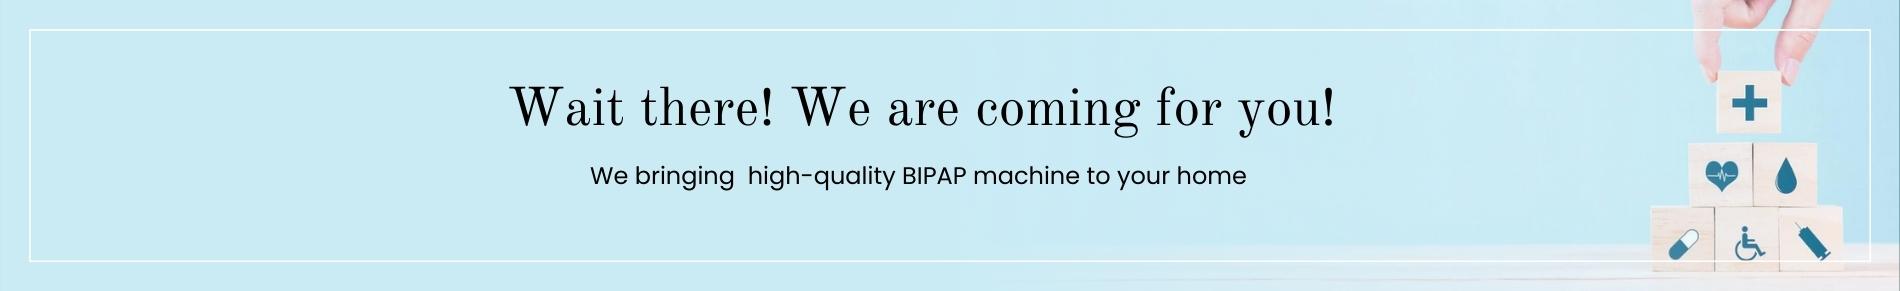 we_bringing_high_quality_bipap_machine_at_your_home1